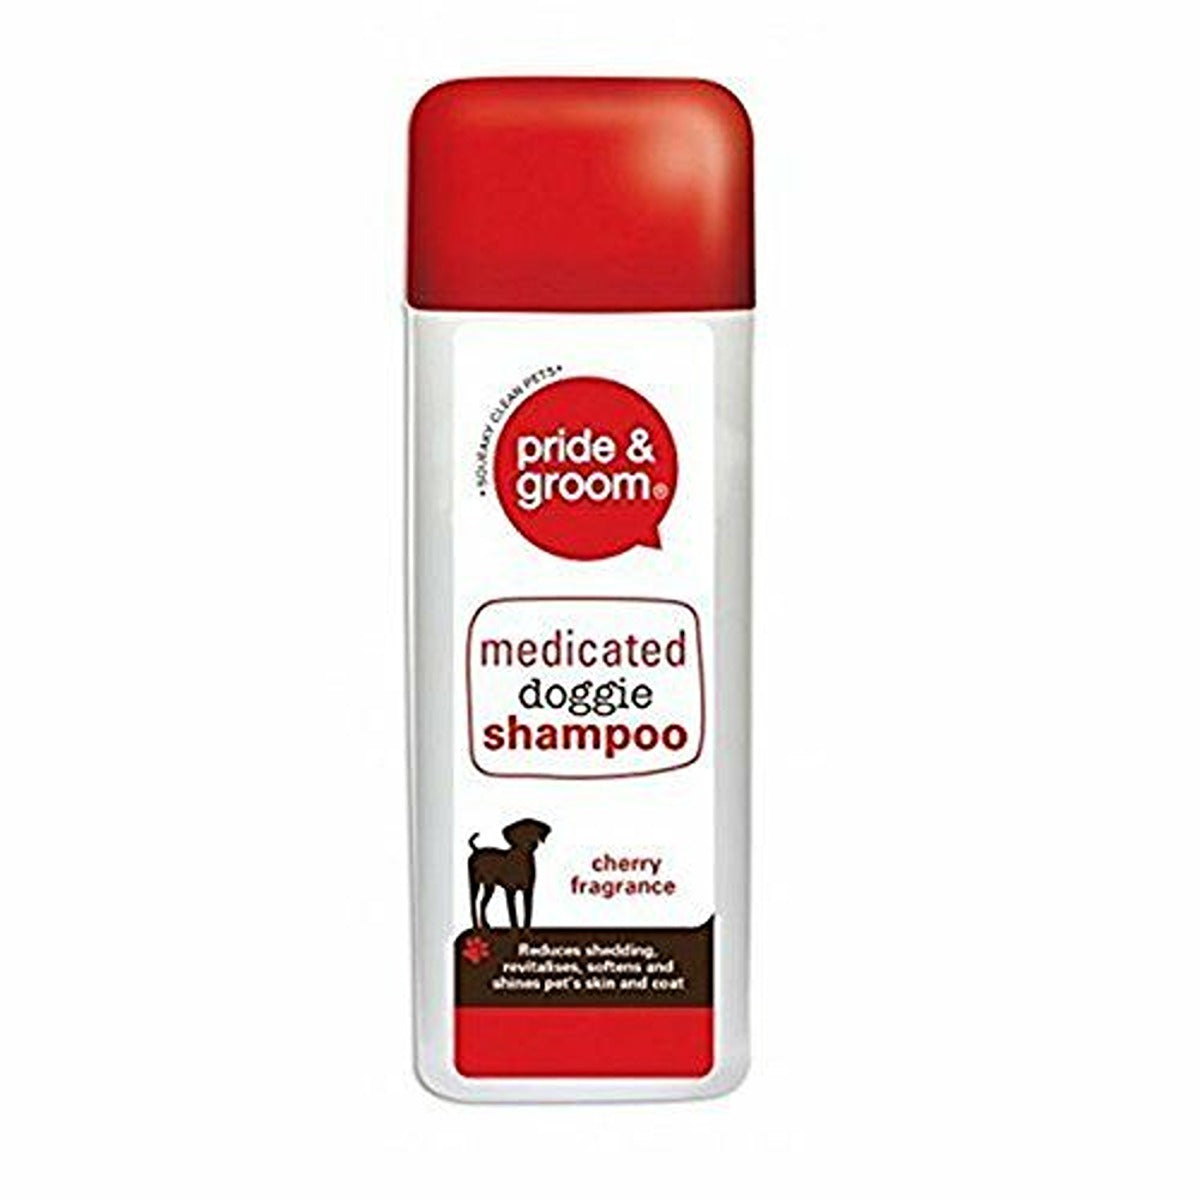 Pride & Groom - Cherry Scent Medicated Dog Shampoo - 300ml - Continental Food Store